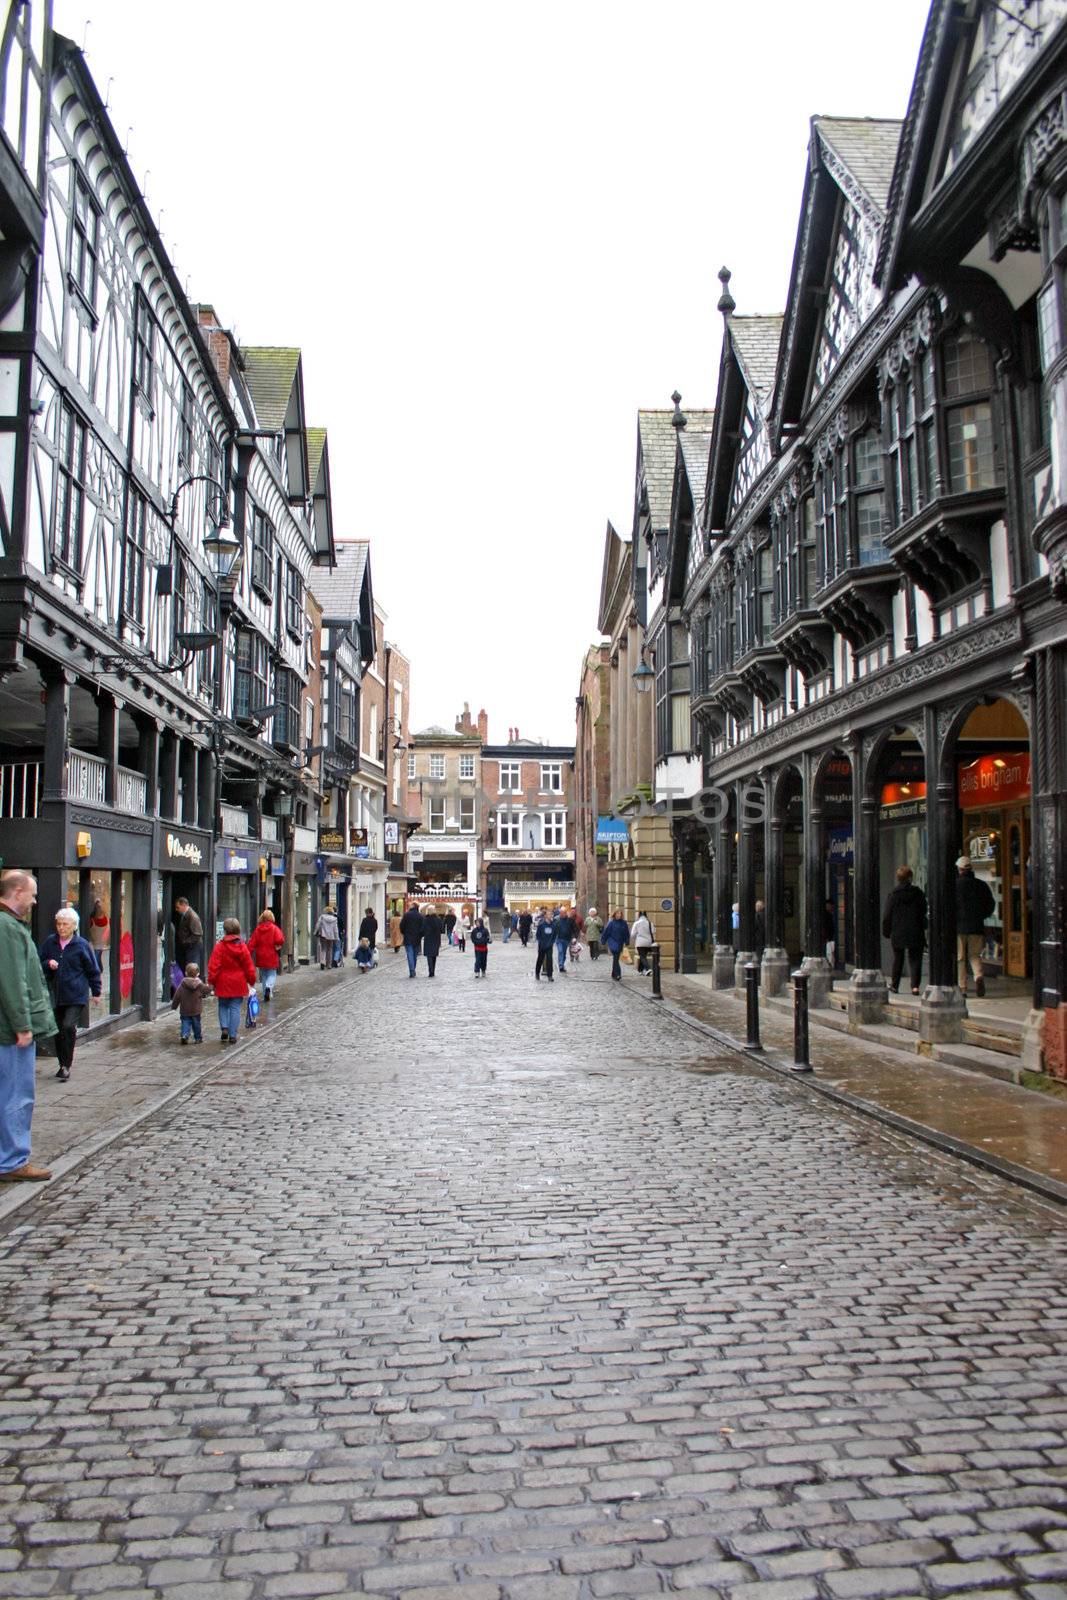 Wet Shopping Day in Chester England